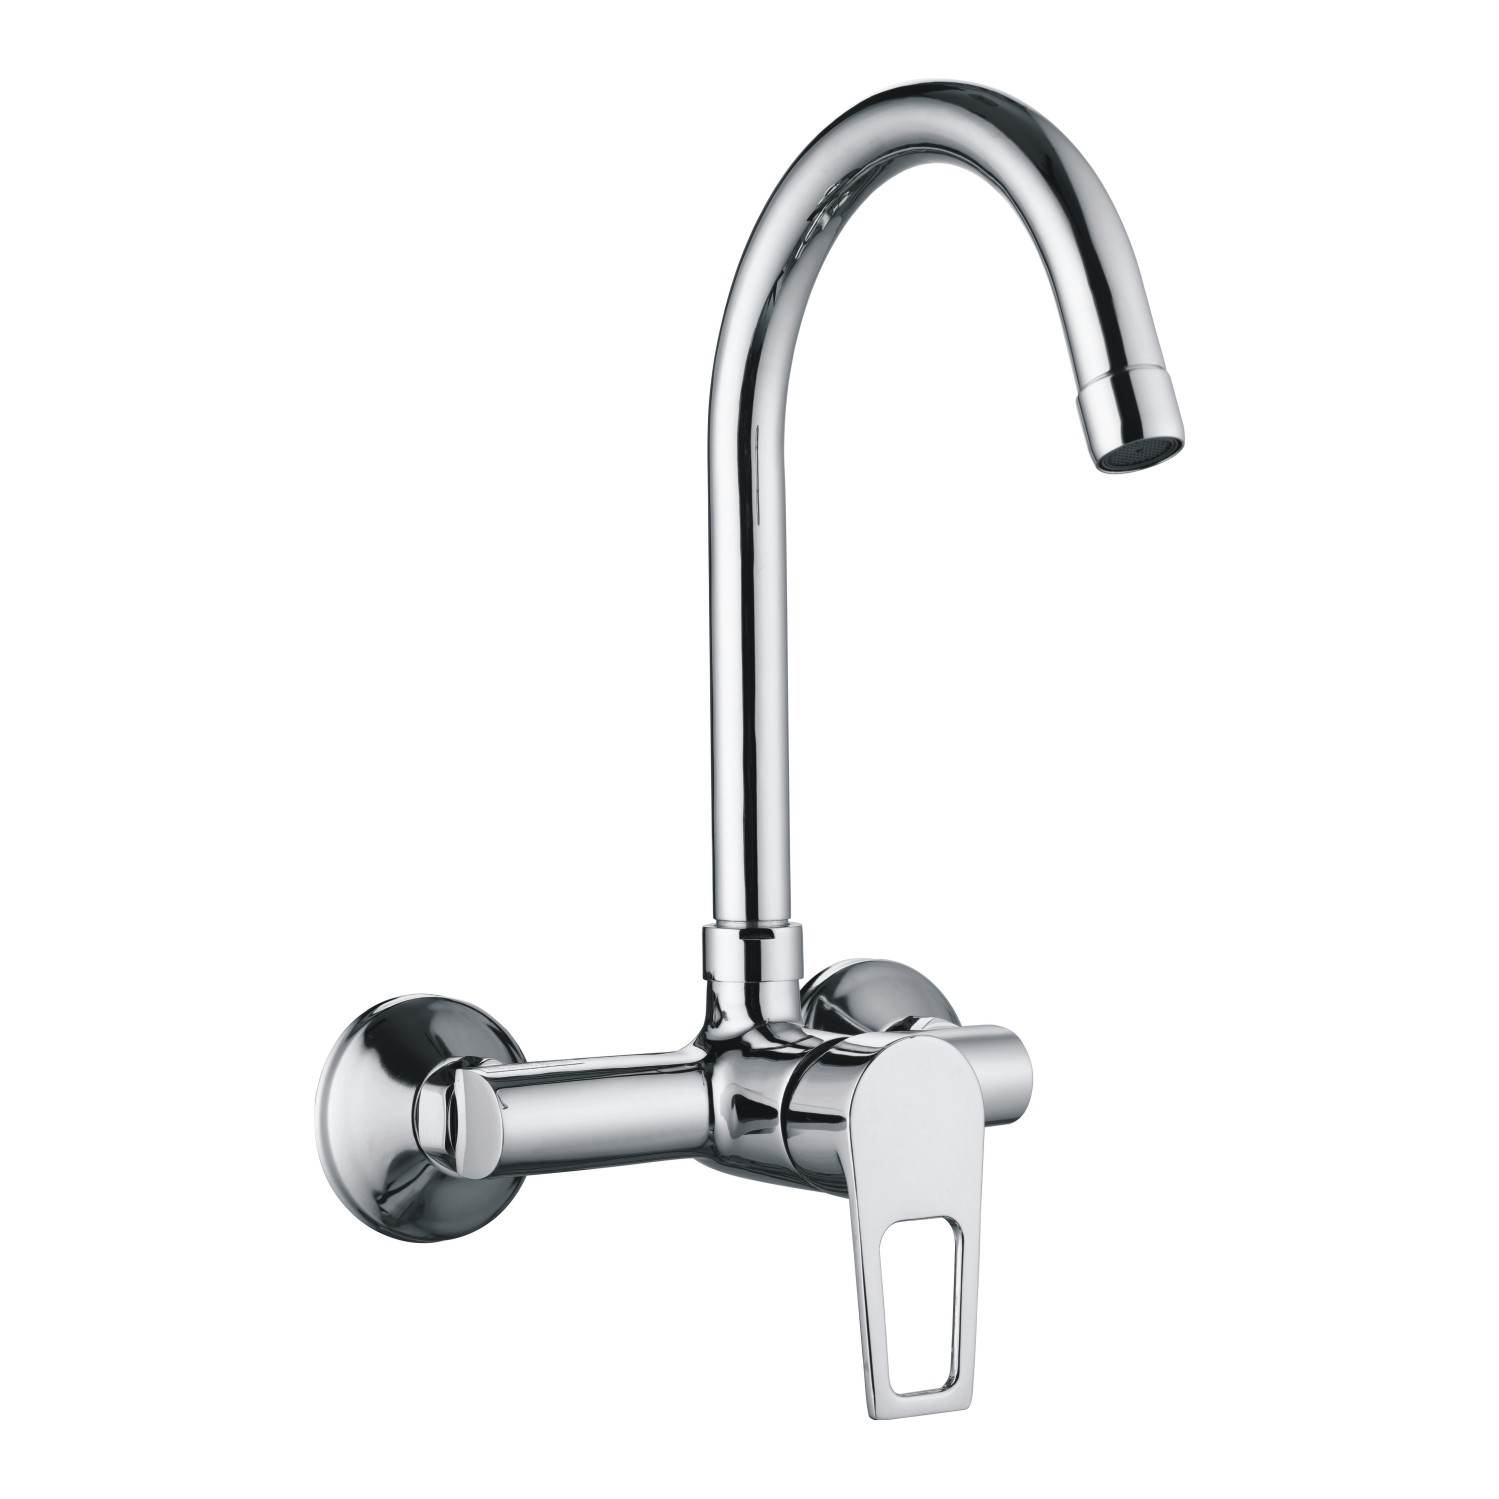 ASTRAL SINGLE LEVER SINK MIXER